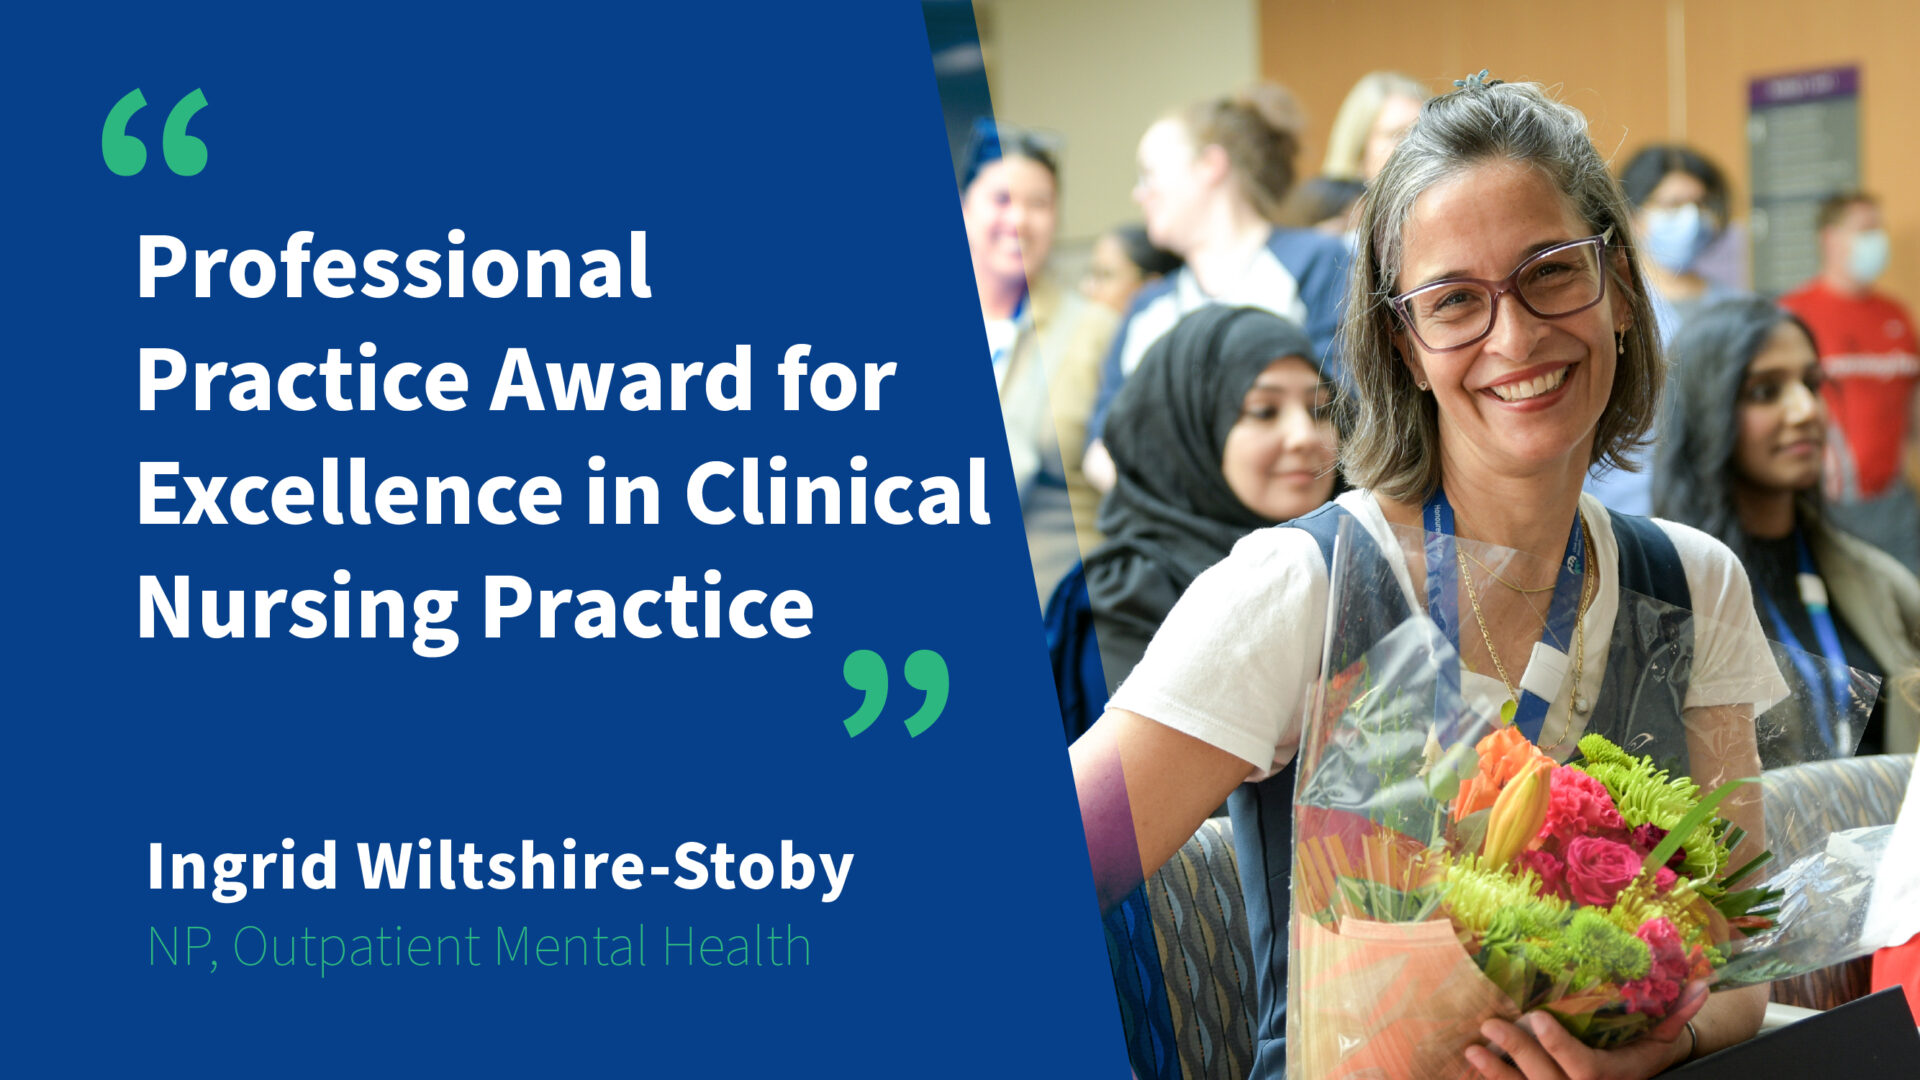 An insert image of Oak Valley Health's nursing week awards winner - Ingrid Wiltshire-Stoby who is an nurse practitioner at the Outpatient Mental Health department of Markham Stouffville Hospital